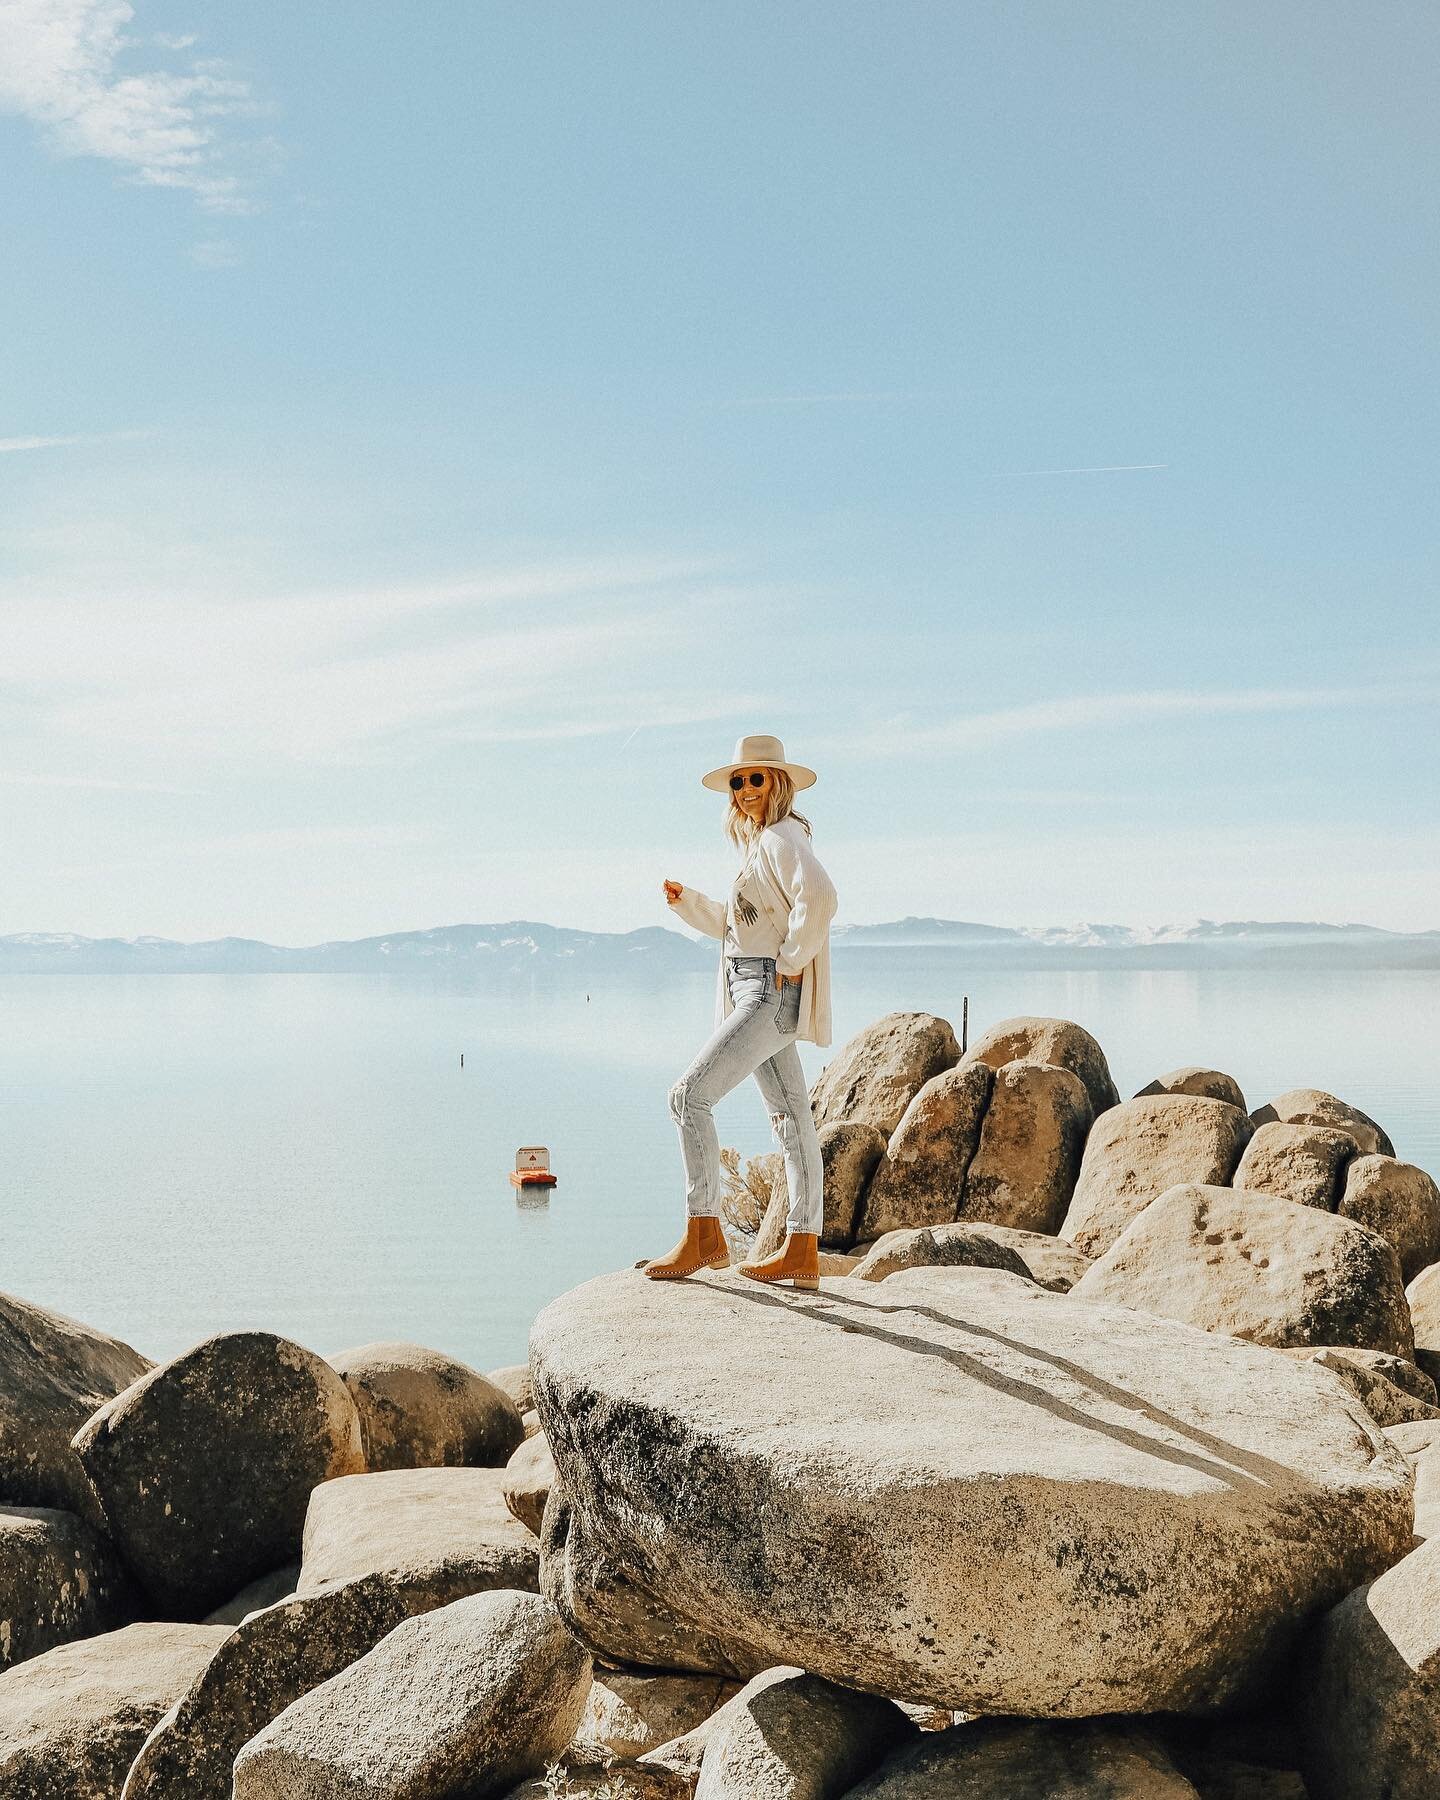 These boots (were not) made for walking (hiking up on rocks) 🤣 Epic day exploring Lake Tahoe with my PIC @hey_thayer 🤙🏼 @liketoknow.it http://liketk.it/31mgk #liketkit